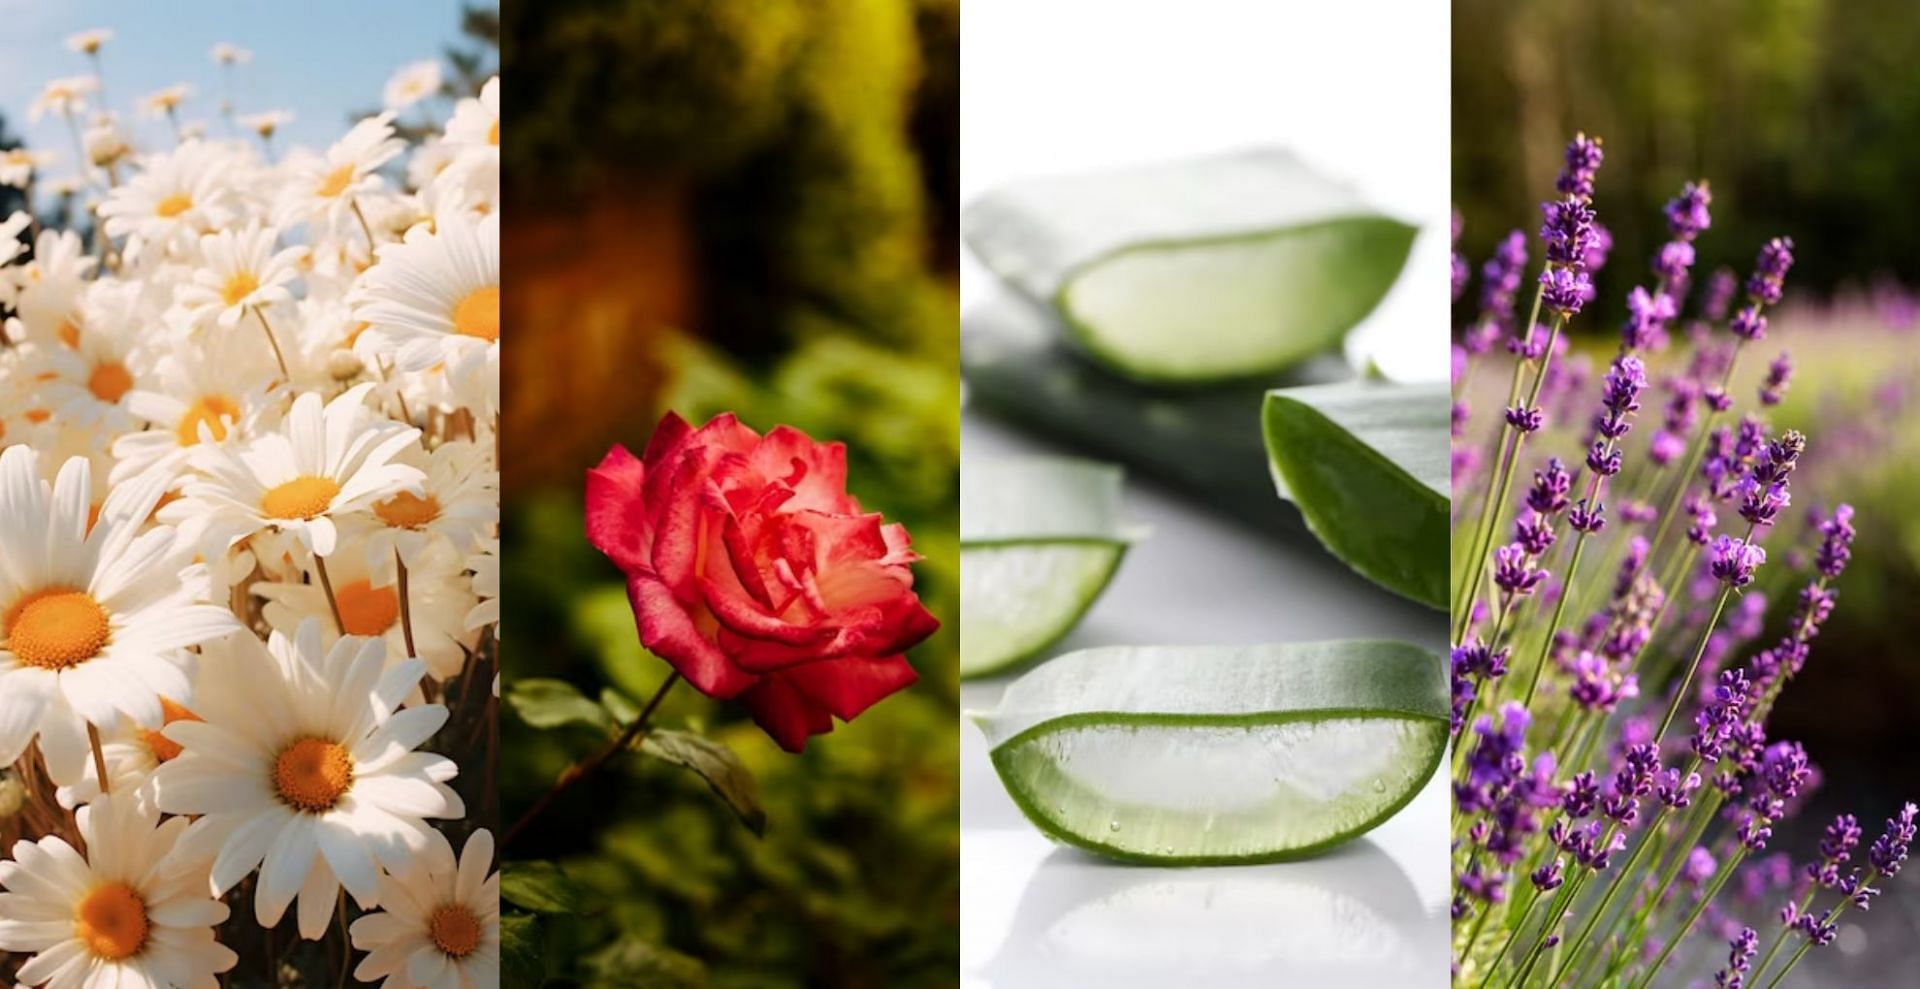 9 plants that are good for skin care: How to use and DIY recipes explored